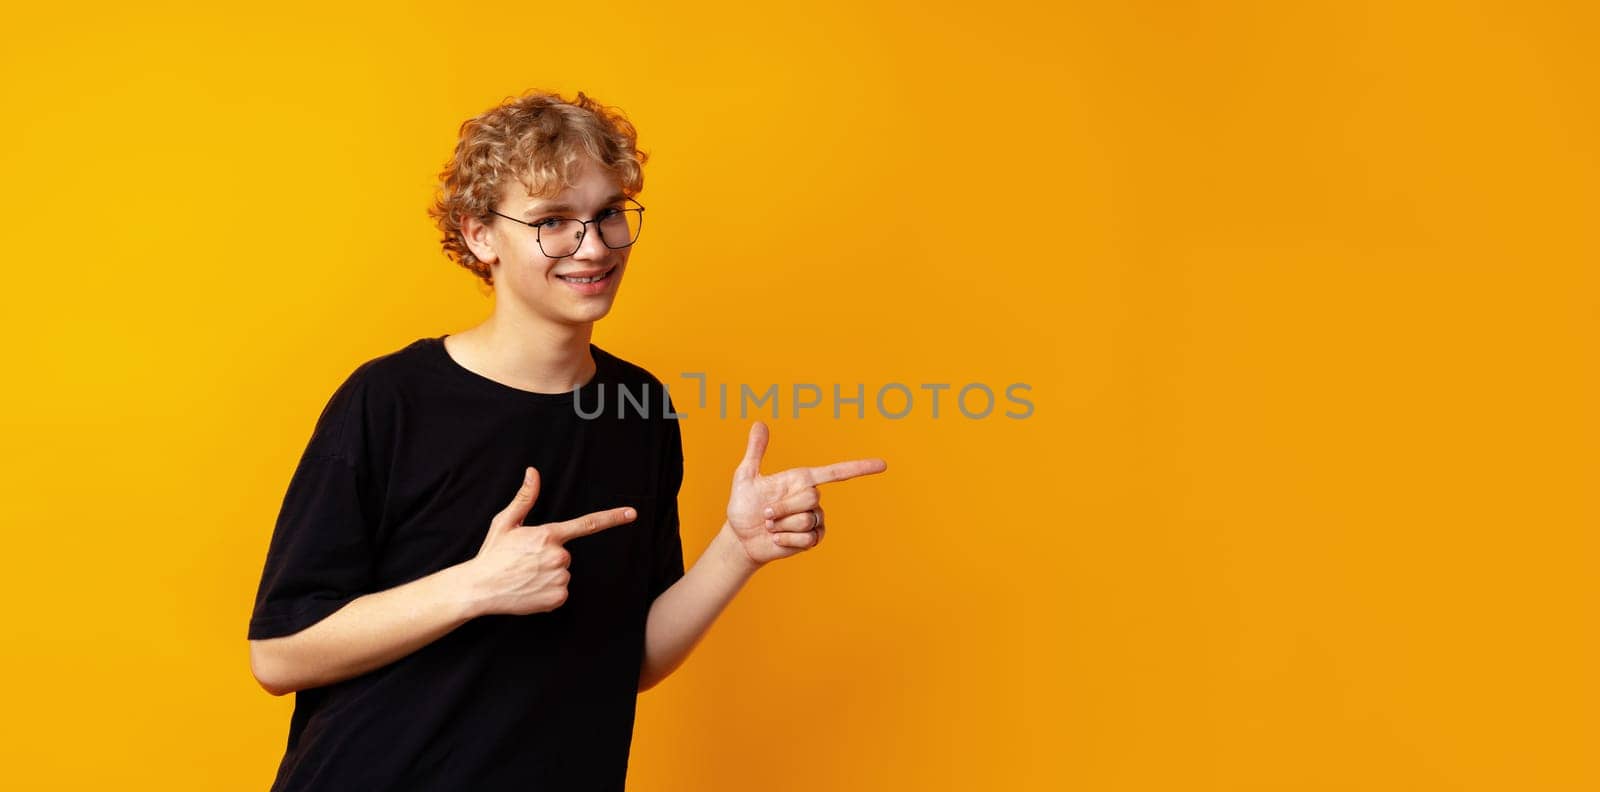 Handsome young man pointing finger to copy space on yellow banner background by Fabrikasimf